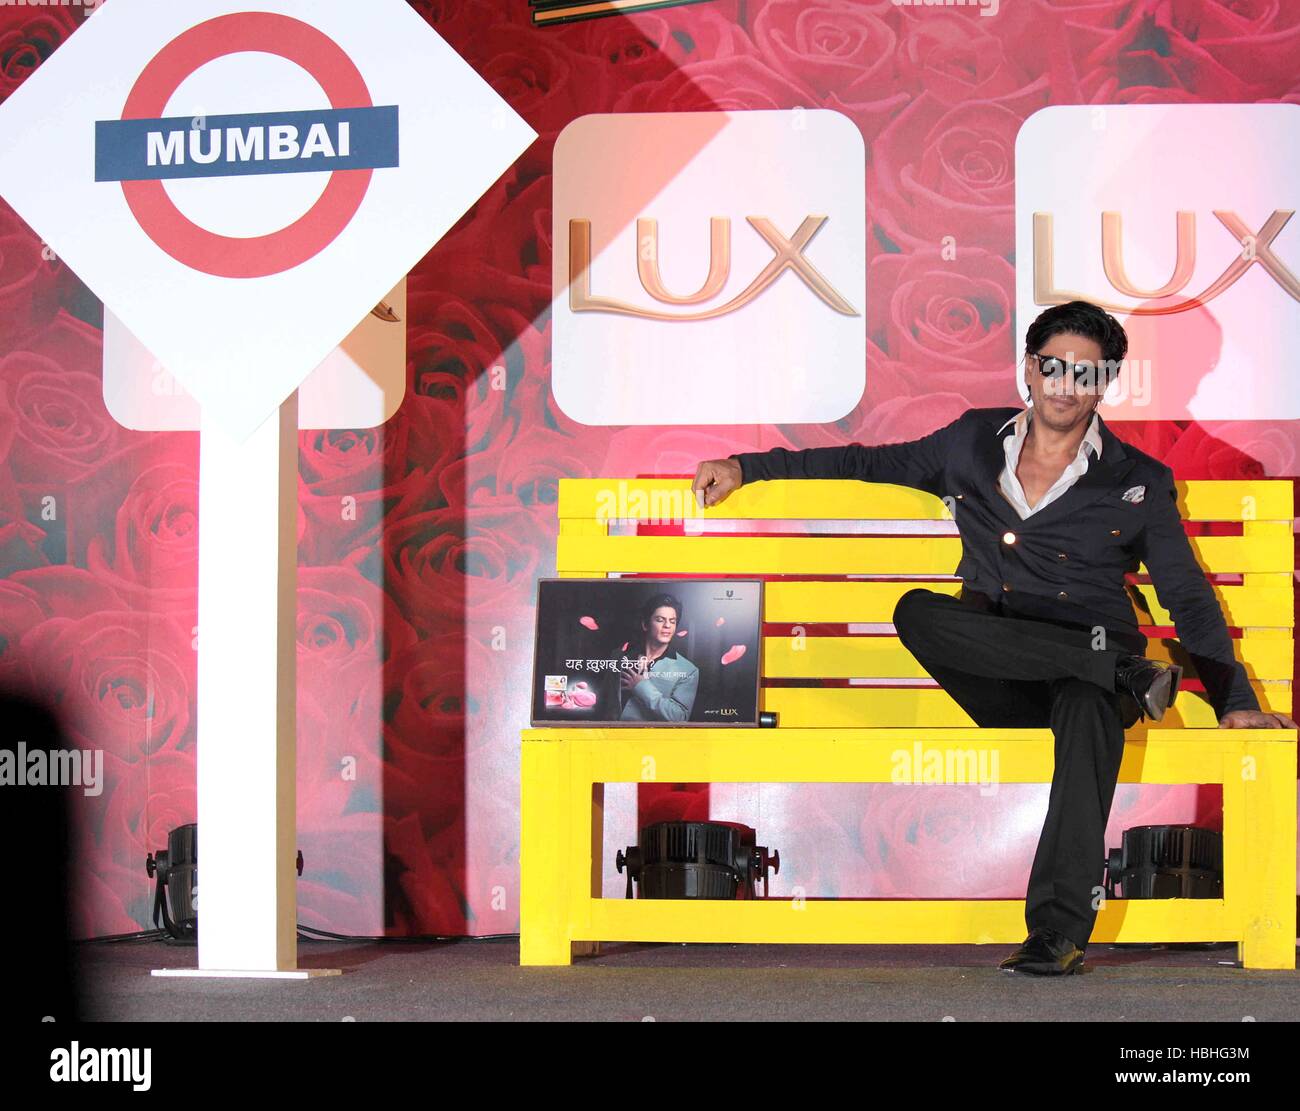 Shahrukh Khan, Indian Bollywood actor the railway platform scene at Lux Chennai Express contest event in Mumbai India Stock Photo